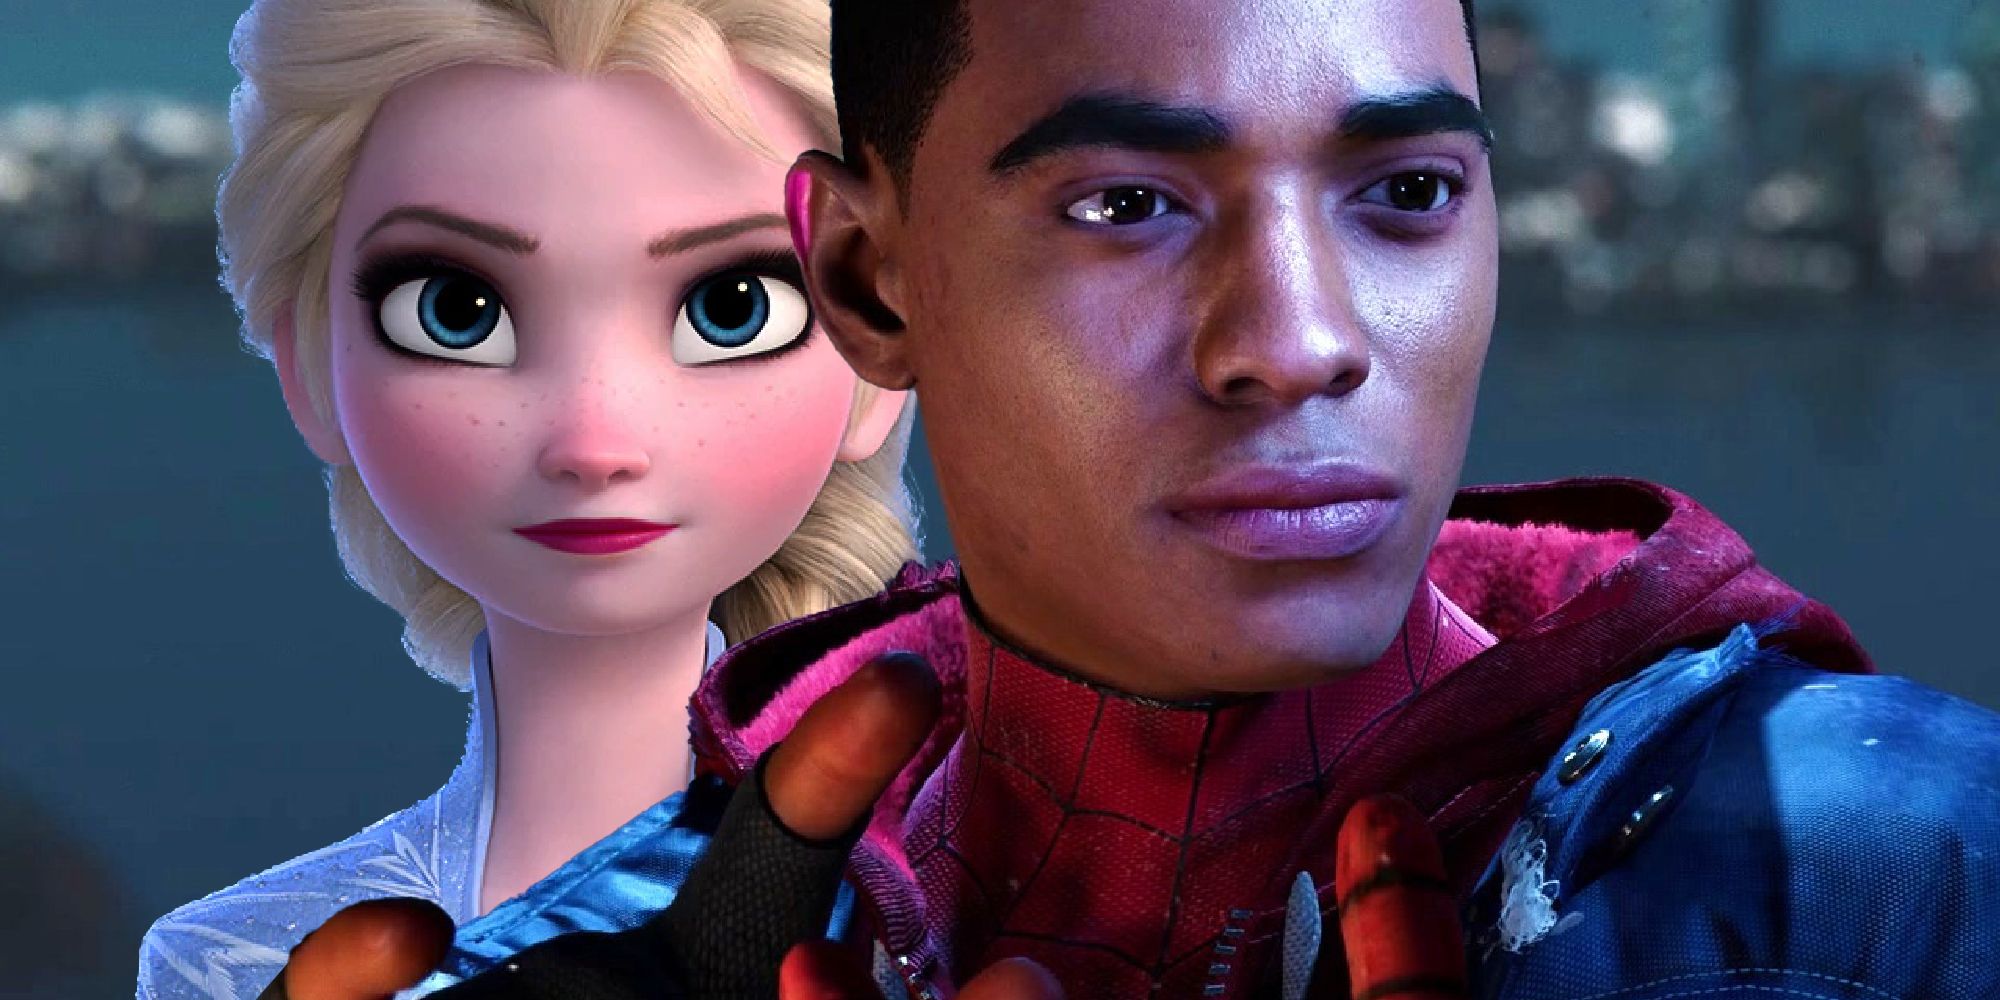 Miles Morales and Elsa from Frozen